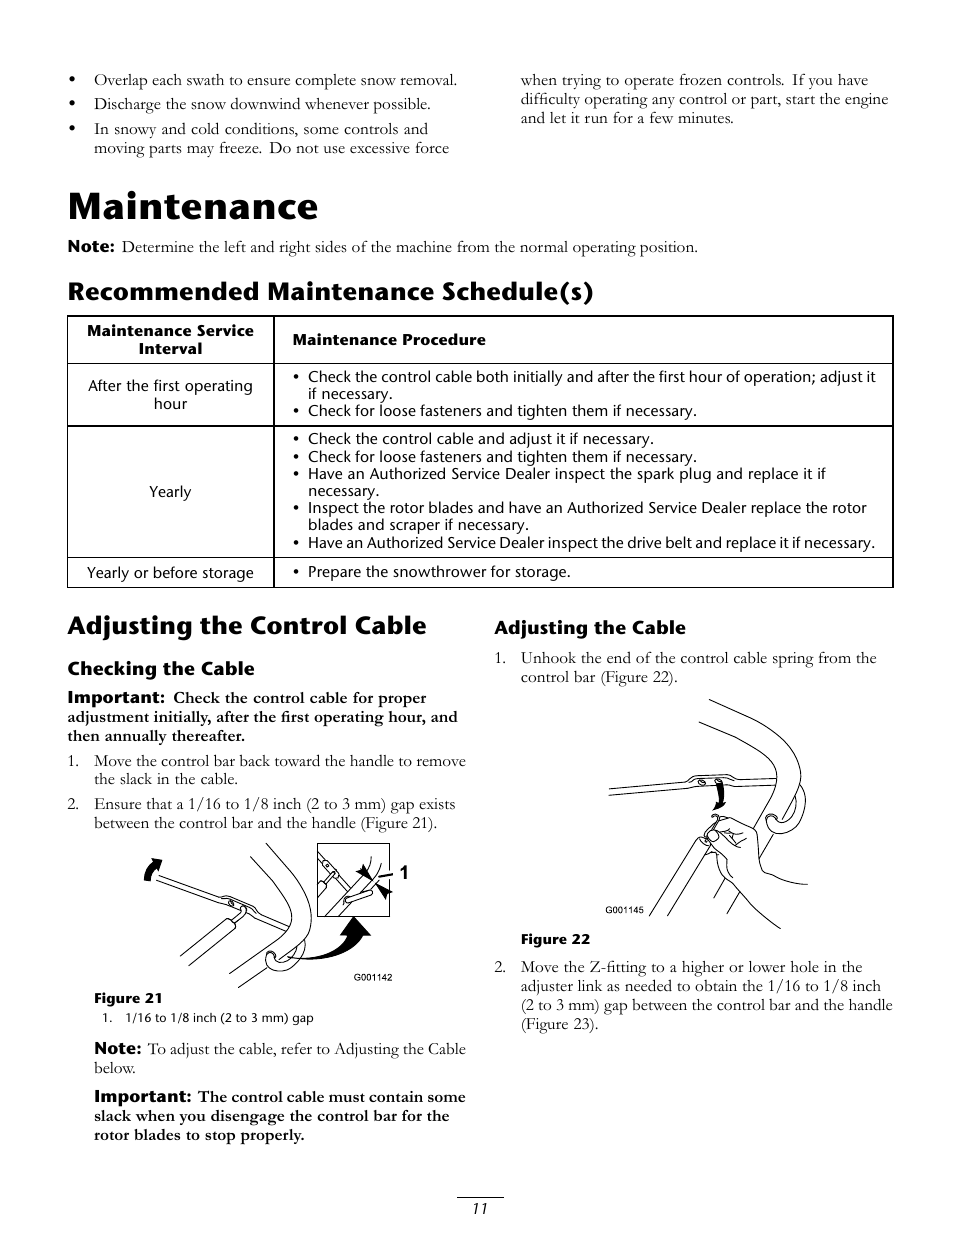 Maintenance, Recommended maintenance schedule(s), Adjusting the control